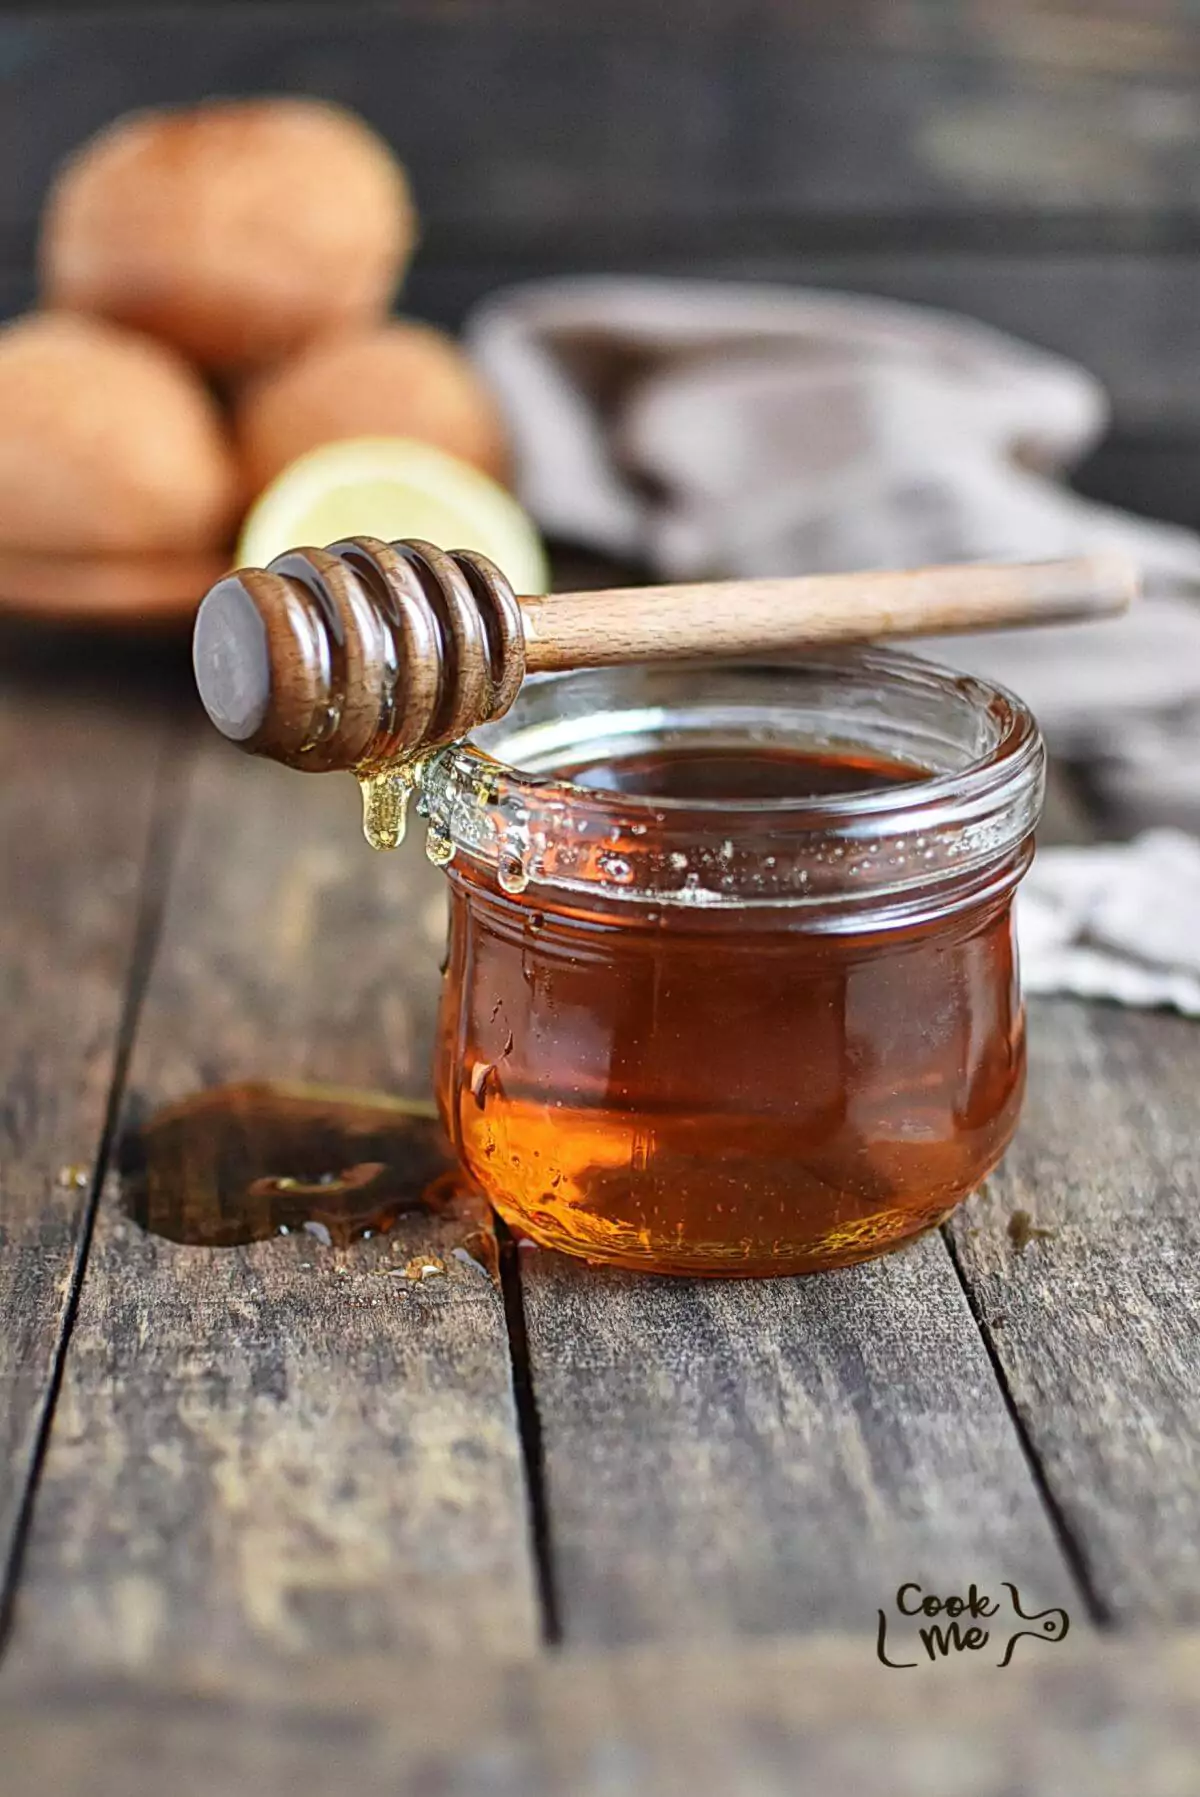 https://cook.me/wp-content/uploads/2022/01/Homemade-Golden-Syrup-Recipes%E2%80%93-Homemade-Homemade-Golden-Syrup%E2%80%93Easy-Homemade-Golden-Syrup-8.jpg